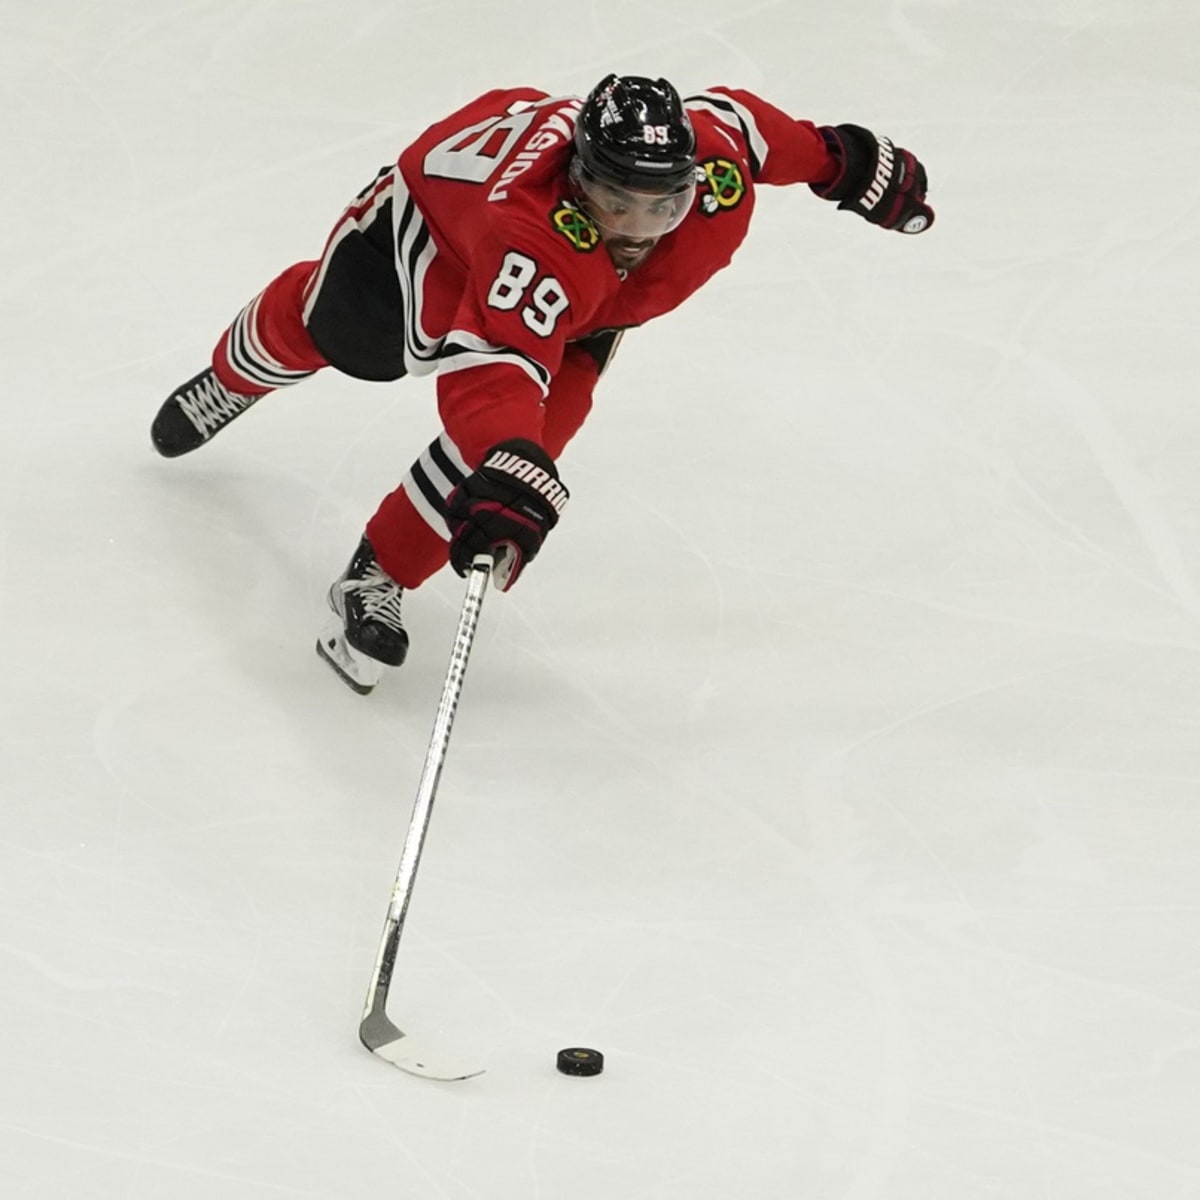 RELEASE: Blackhawks Sign Entwistle to Two-Year Extension